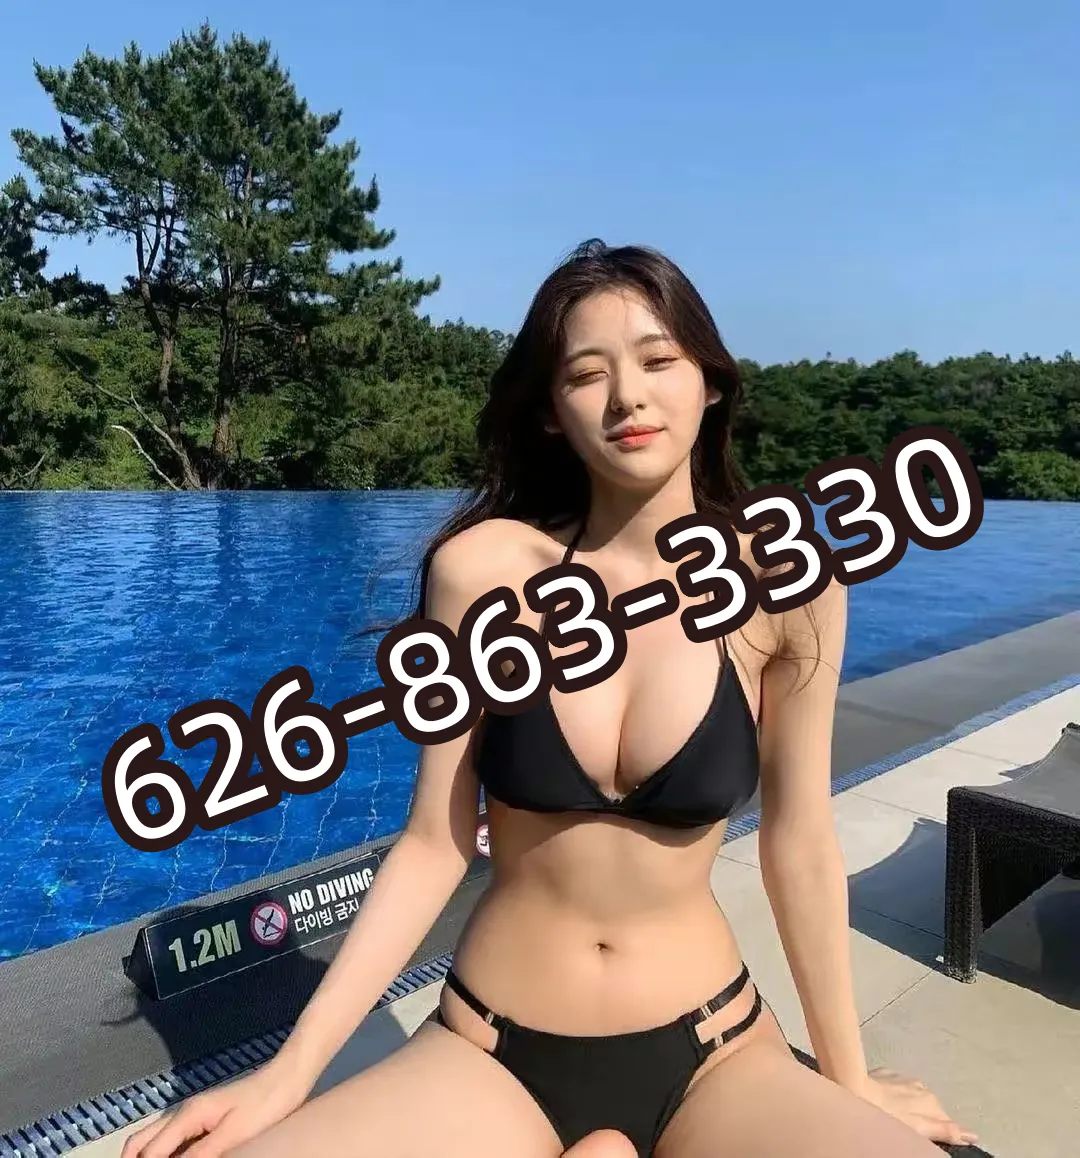 Reviews about escort with phone number 6268633330